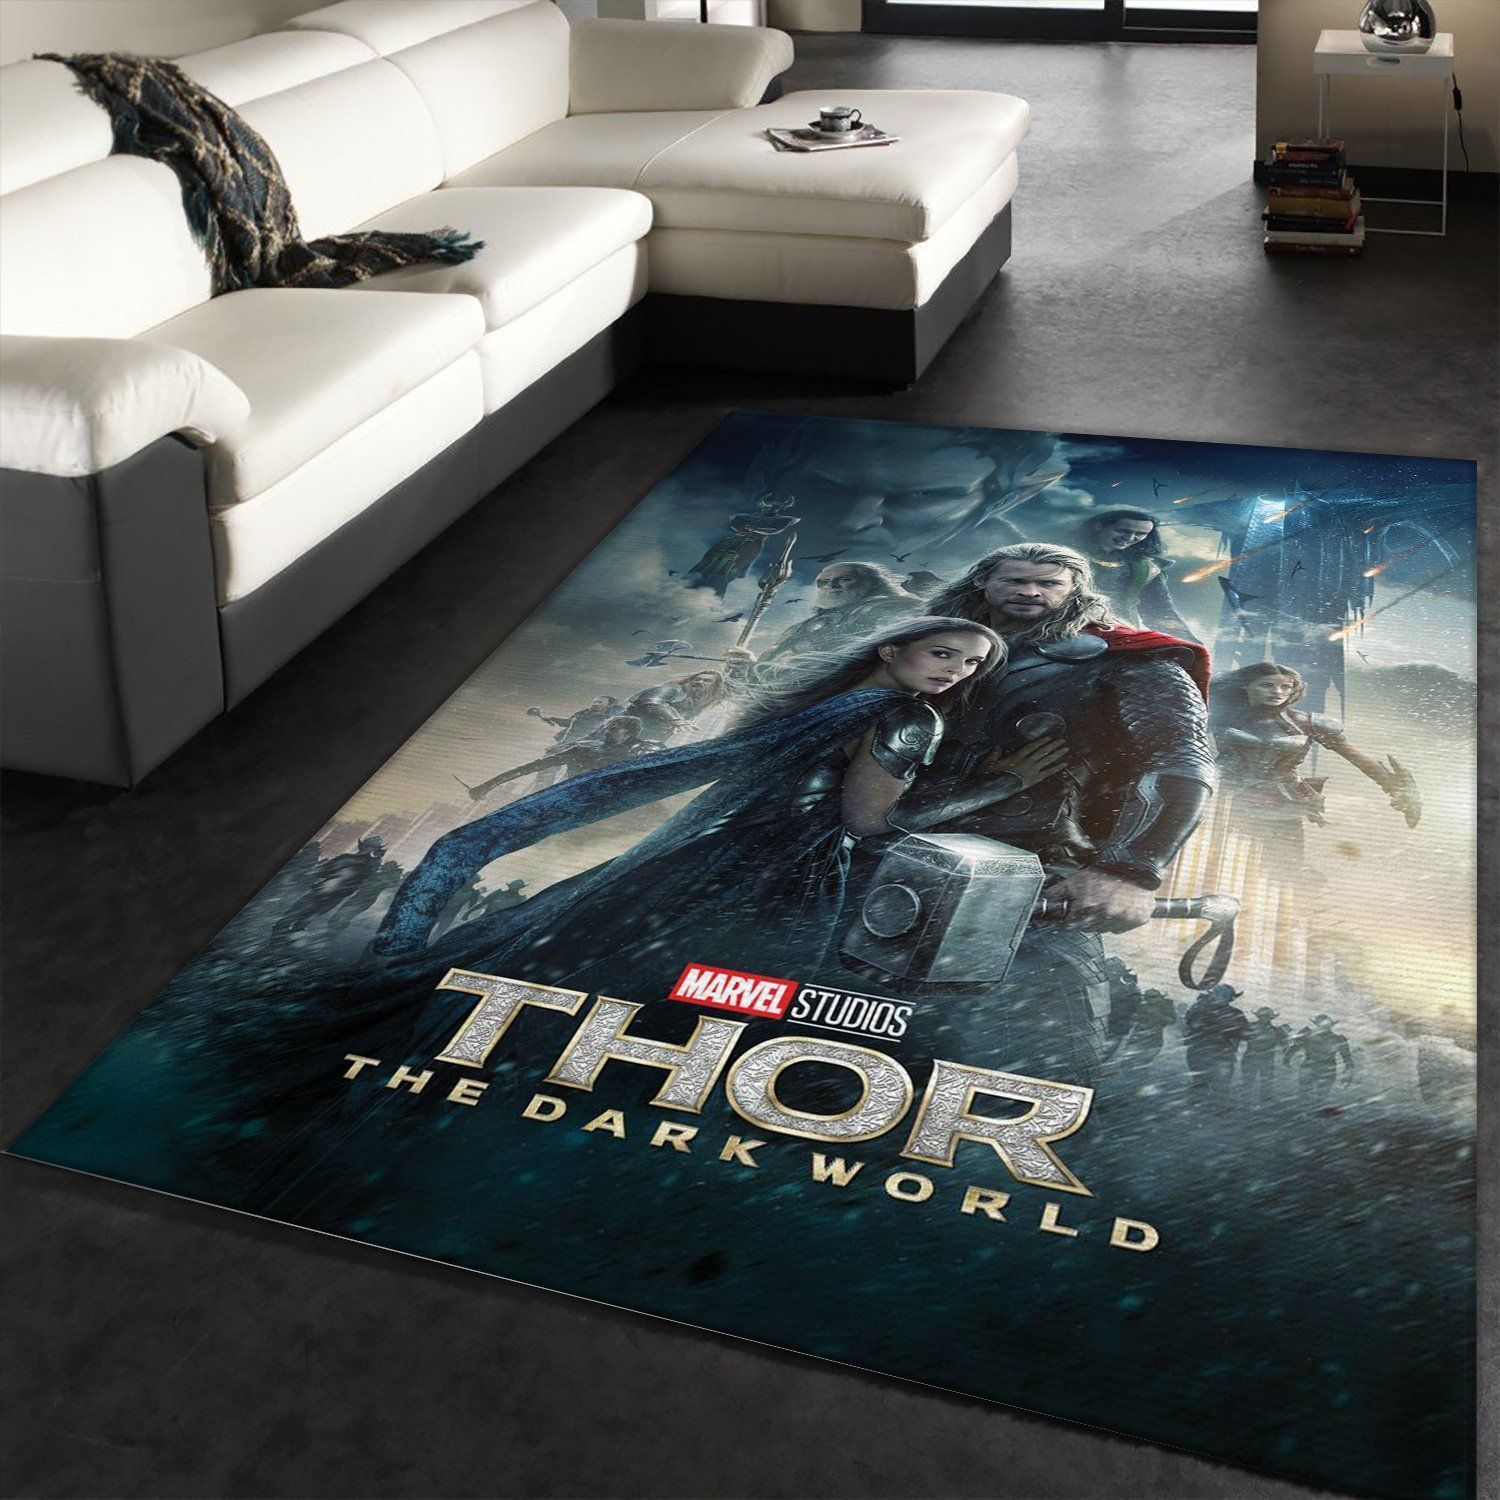 Thor The Dark World Movie Area Rug For Christmas, Kitchen Rug, Home Decor Floor Decor - Indoor Outdoor Rugs 1